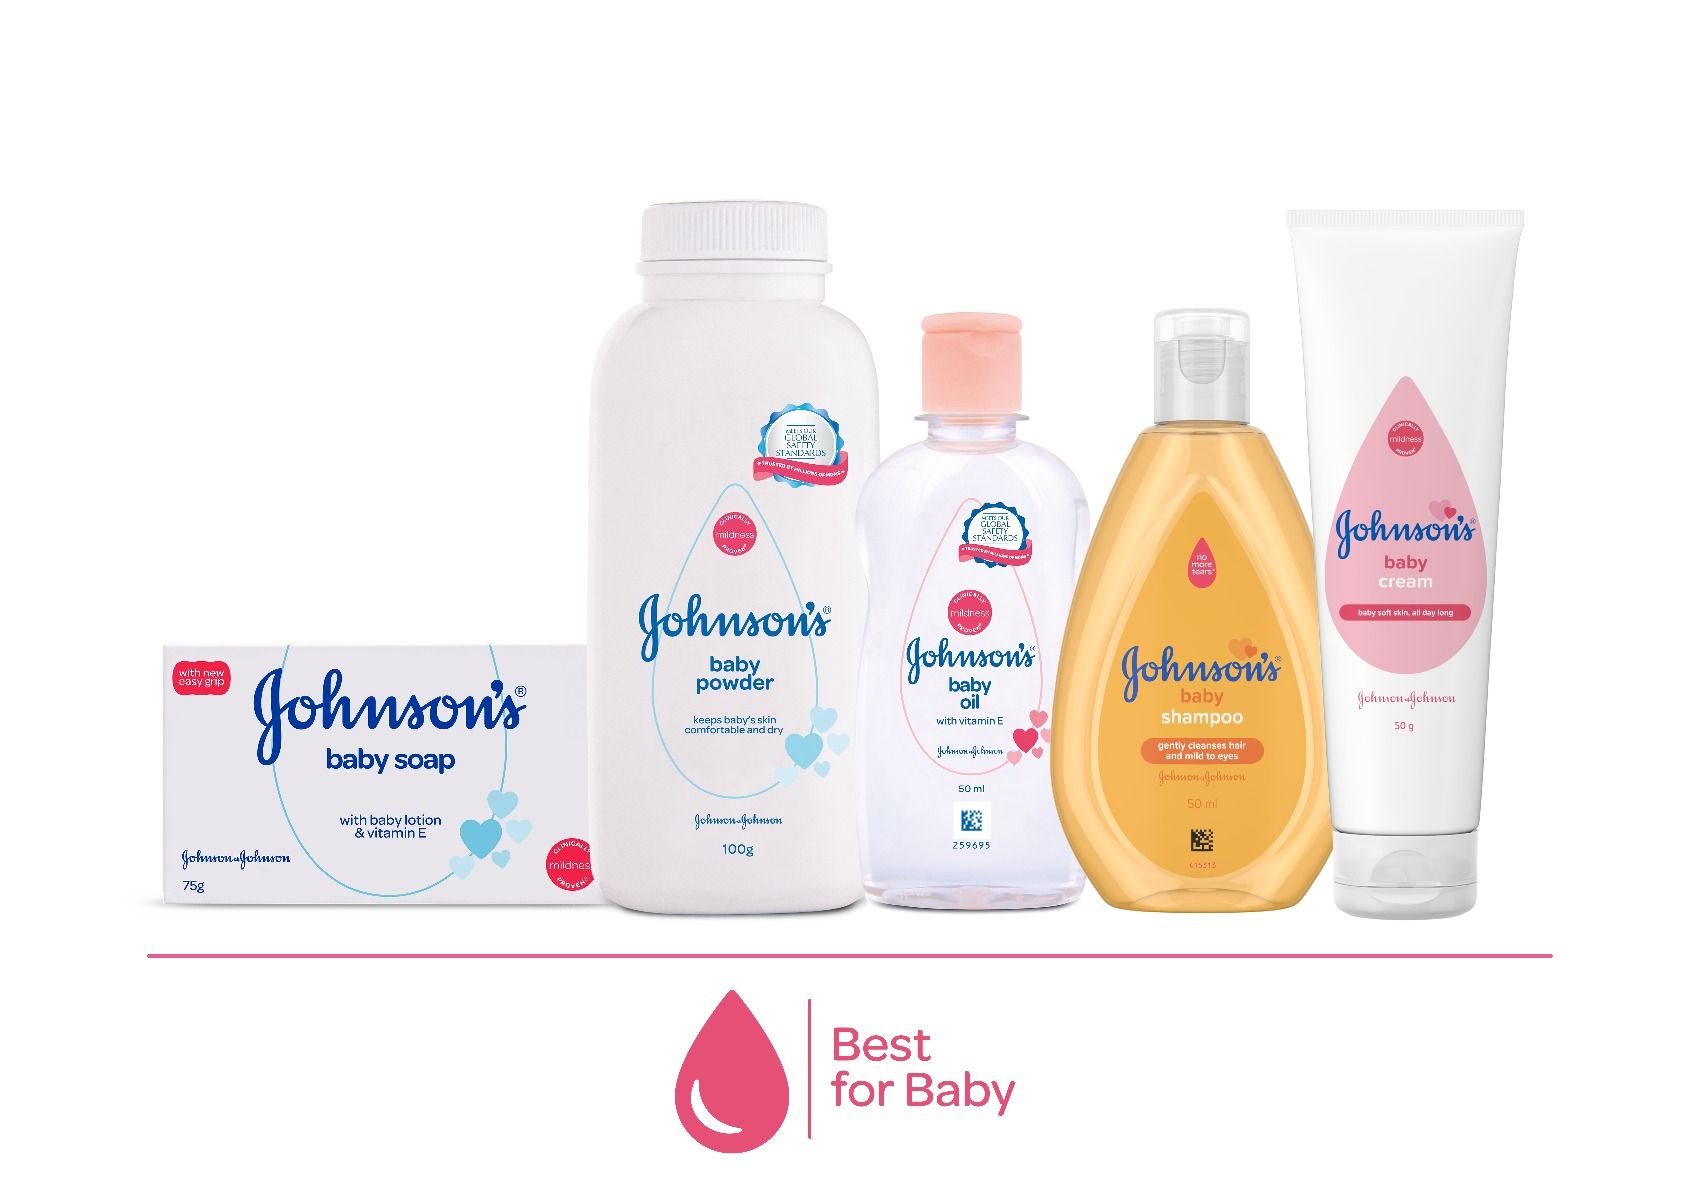 Buy Johnson's Baby Care Collection Gift Box, 7 Gift items Online